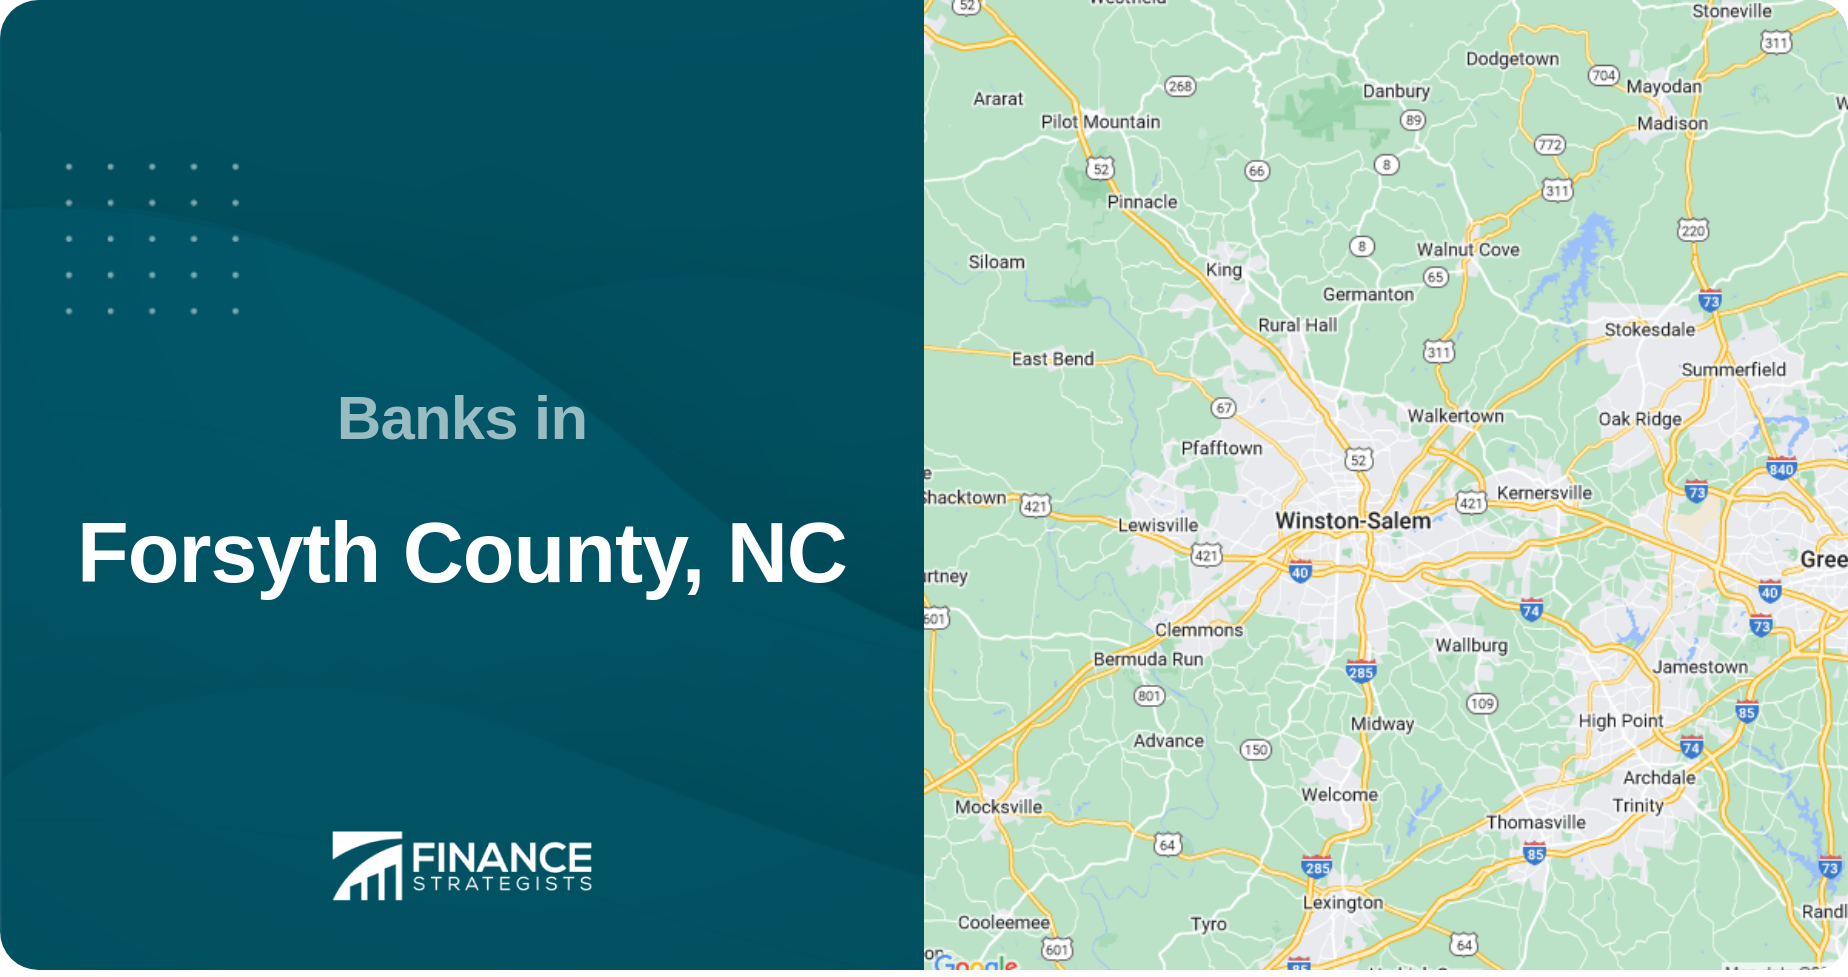 Banks in Forsyth County, NC